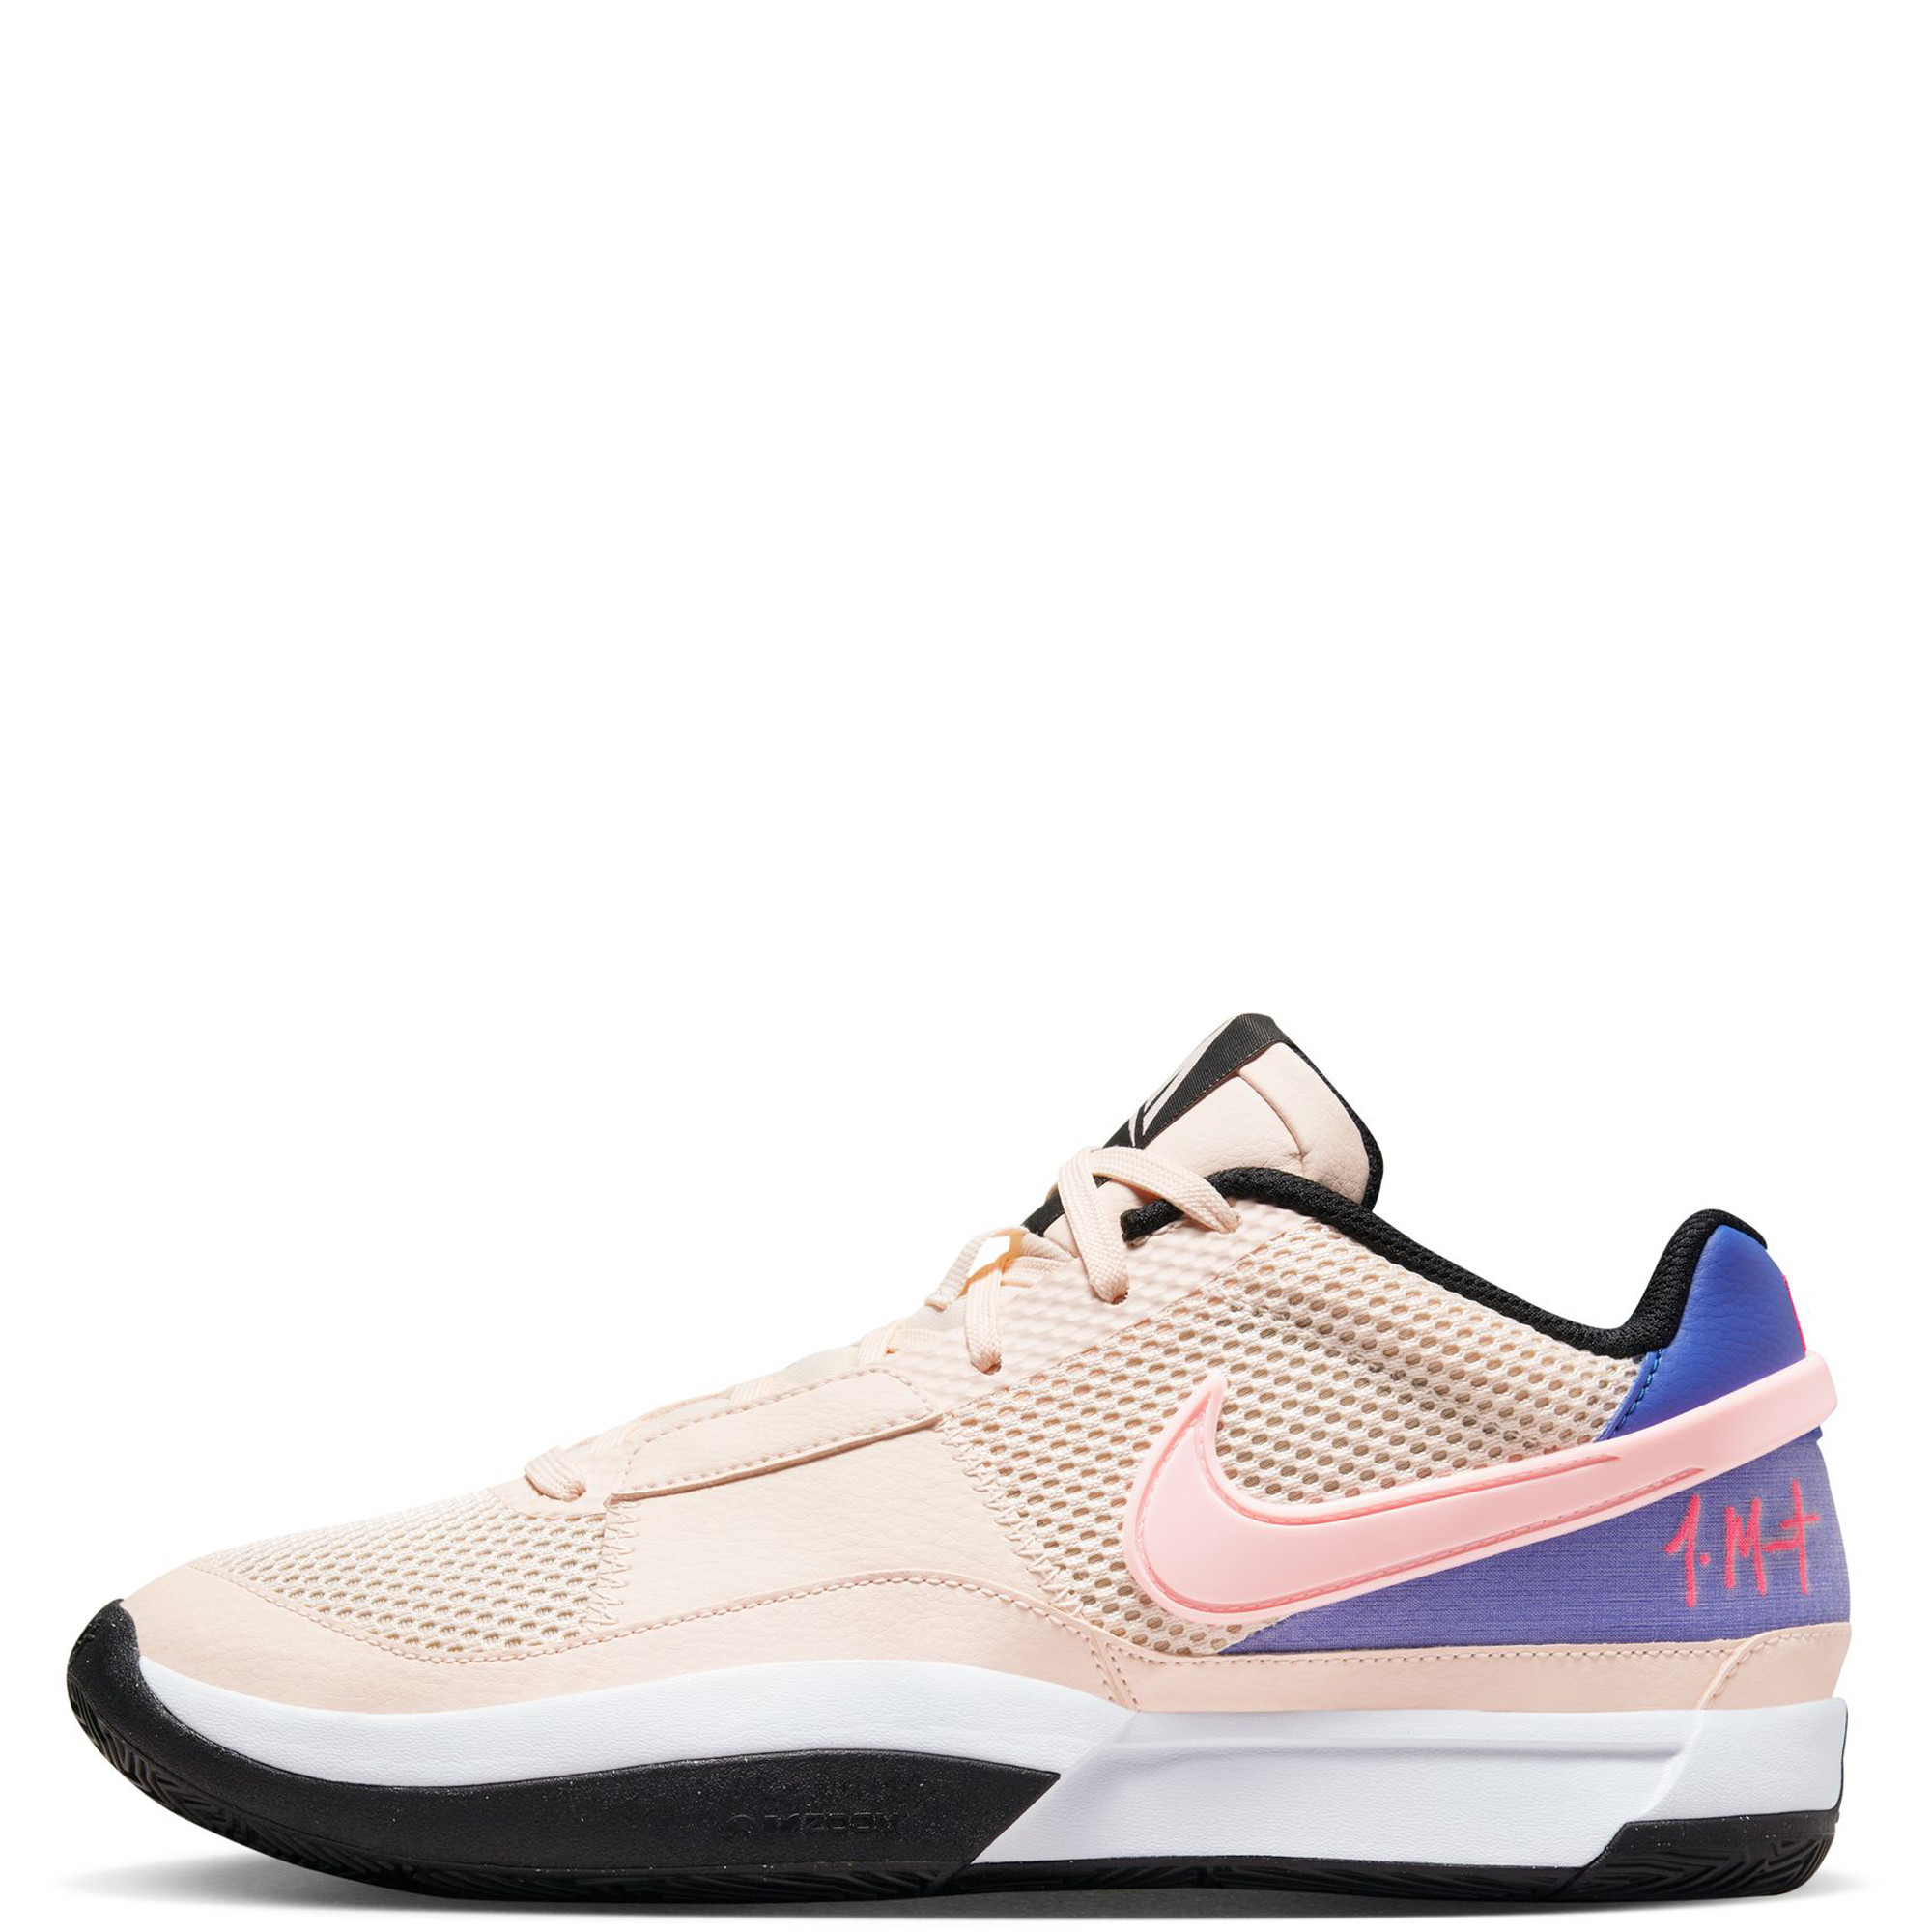 Nike Ja 1 Basketball Shoes in Pink/guava Ice Size 8.5